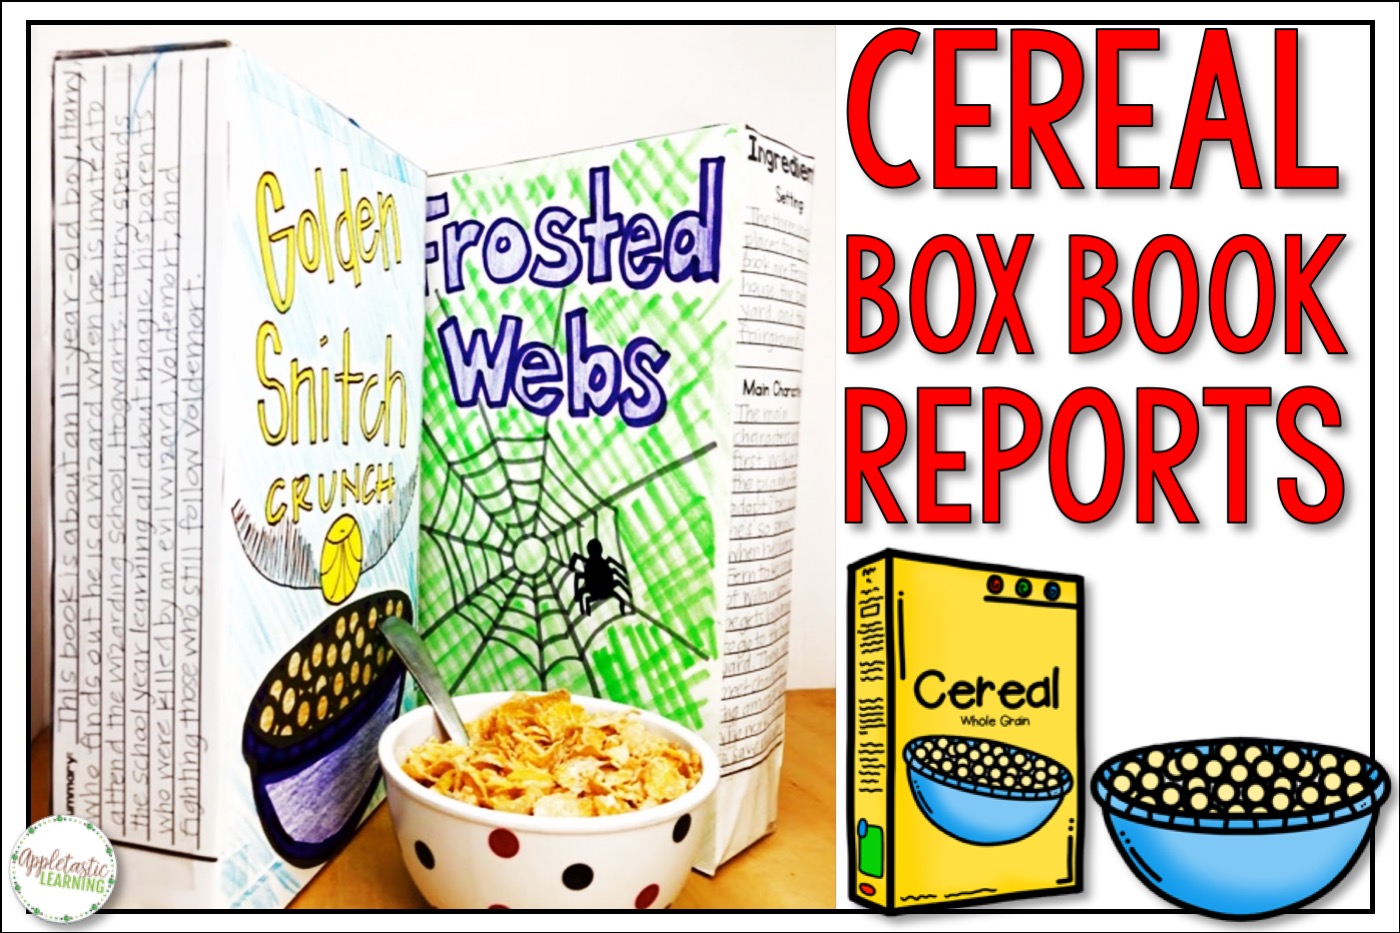 Cereal Box Book Reports A Fun Alternative! Appletastic Learning